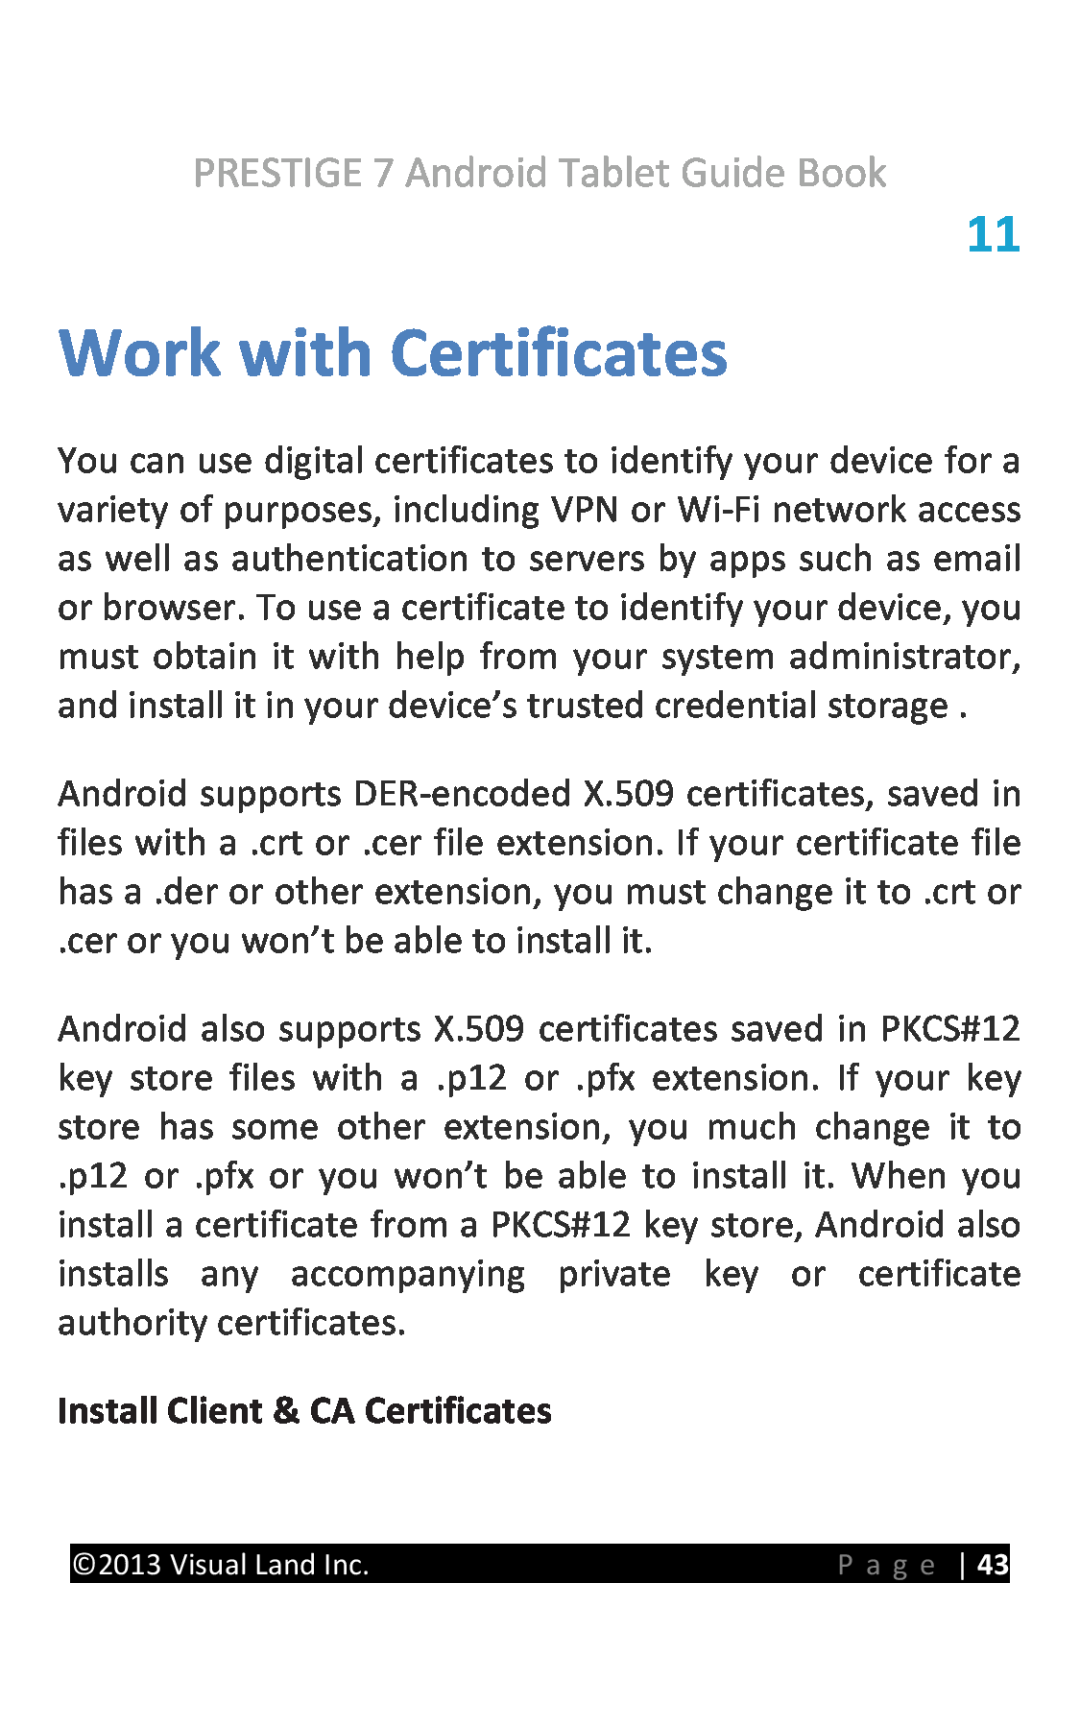 Visual Land 7D8TCBLK Work with Certificates, Install Client & CA Certificates, PRESTIGE 7 Android Tablet Guide Book 